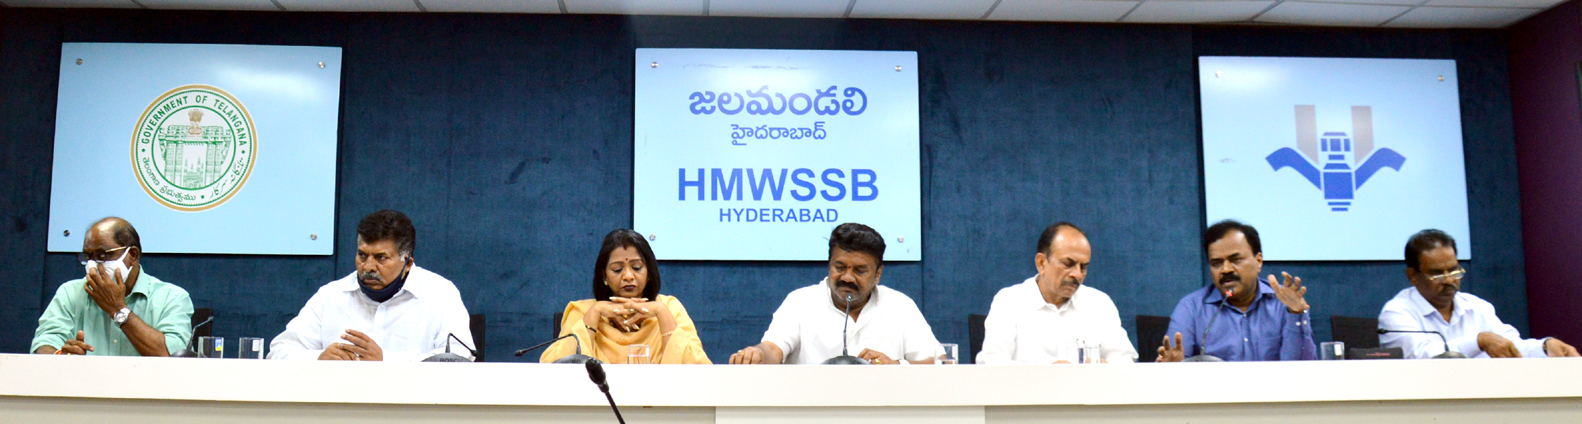 HYDERABAD DRINKING WATER AND SEWERAGE ISSUES WILL BE RESOLVED IN NEXT TWO YEARS ON 25.09.2021